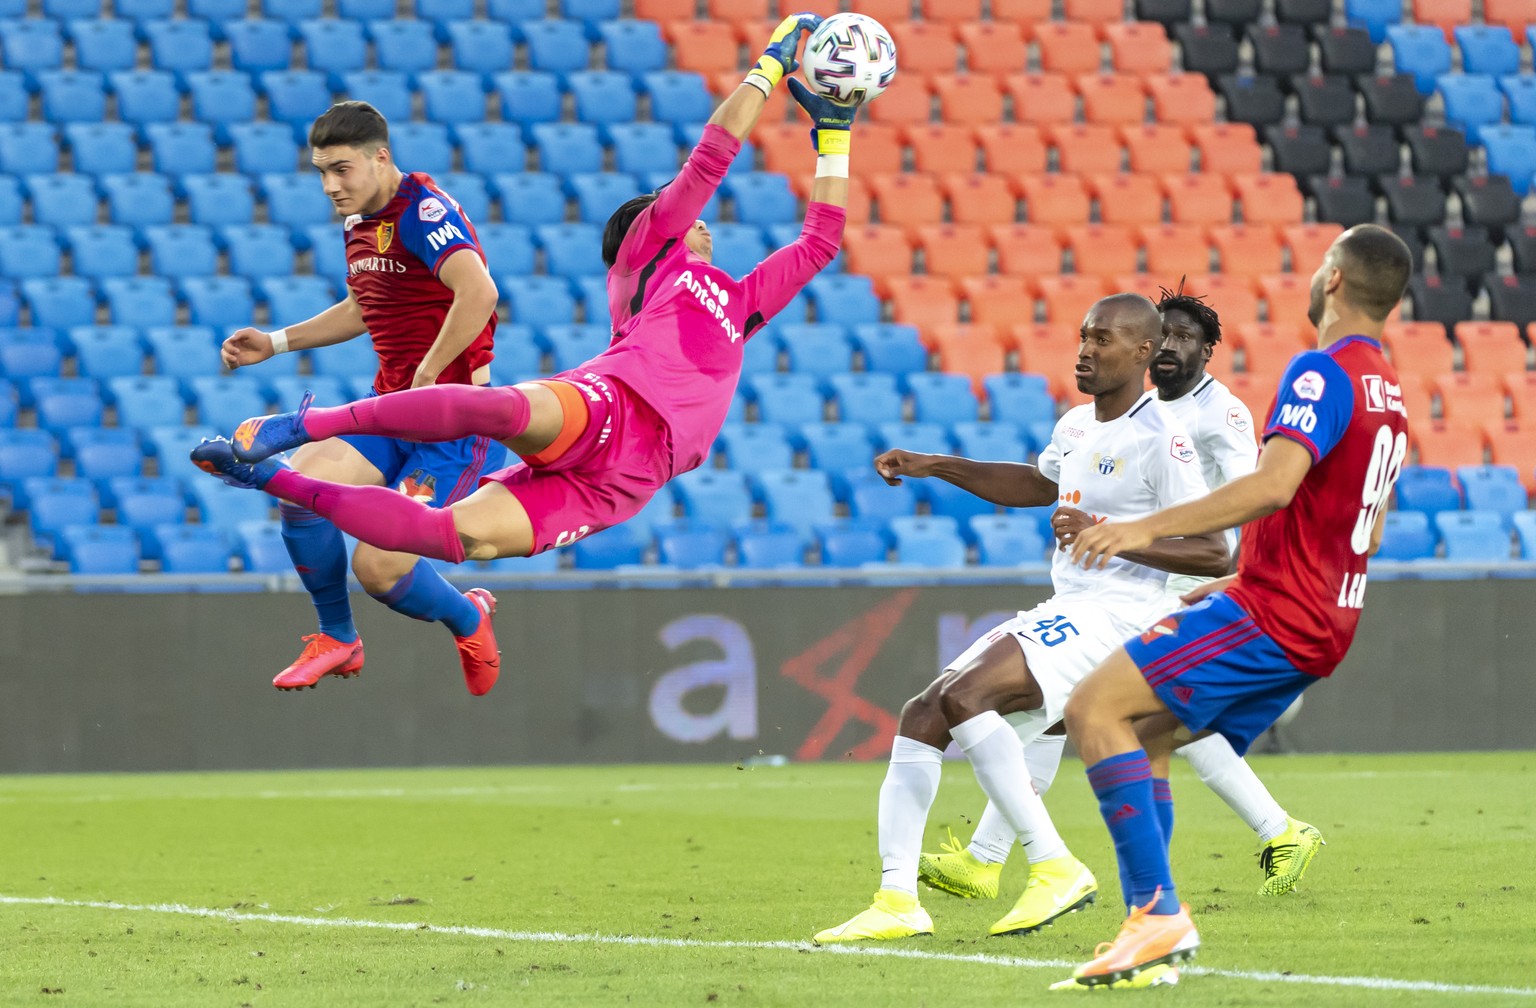 Zuerich&#039;s goalkeeper Novem Baumann, center, in action during the Super League match between FC Basel 1893 and FC Zuerich at the St. Jakob-Park stadium in Basel, Switzerland, on Tuesday, July 14,  ...